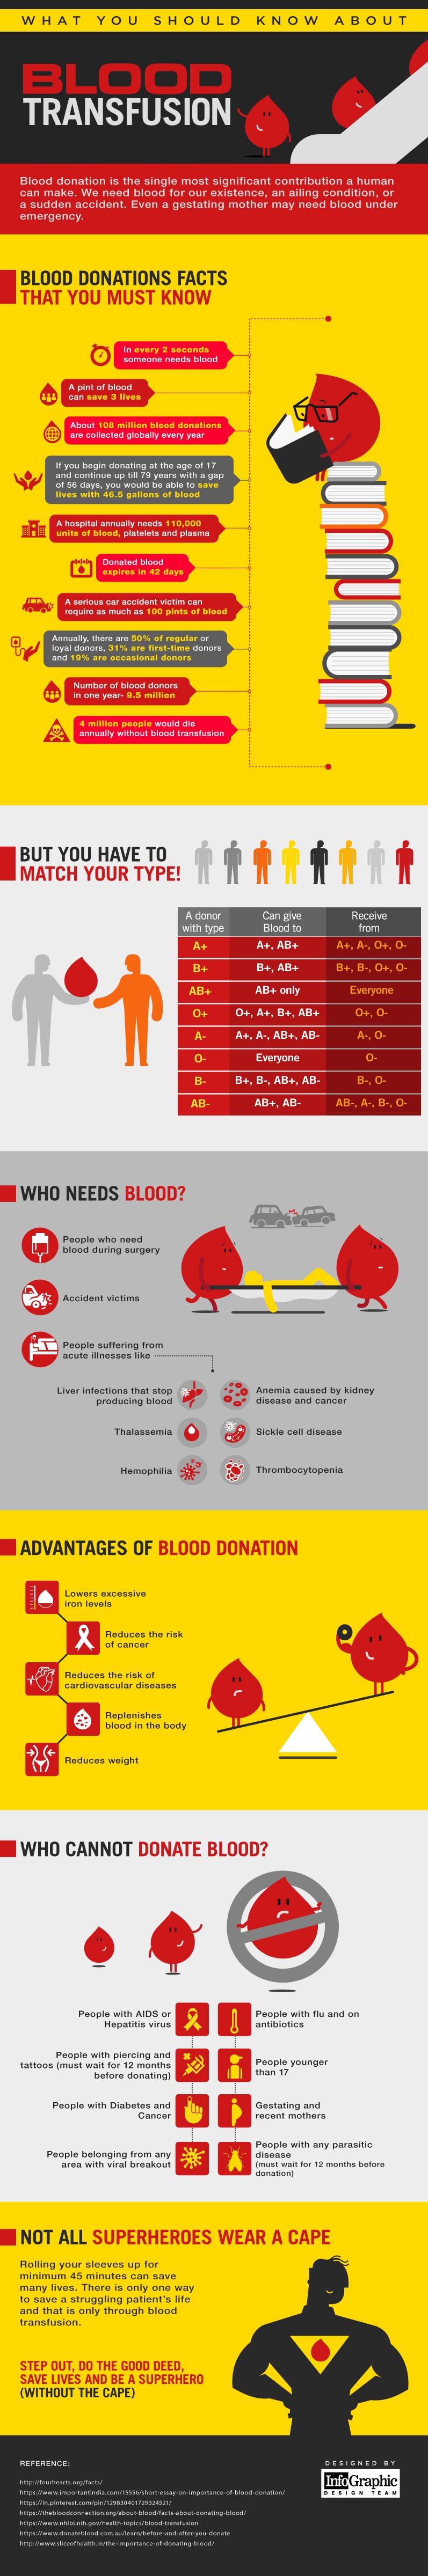 What You Should Know About Blood Transfusions